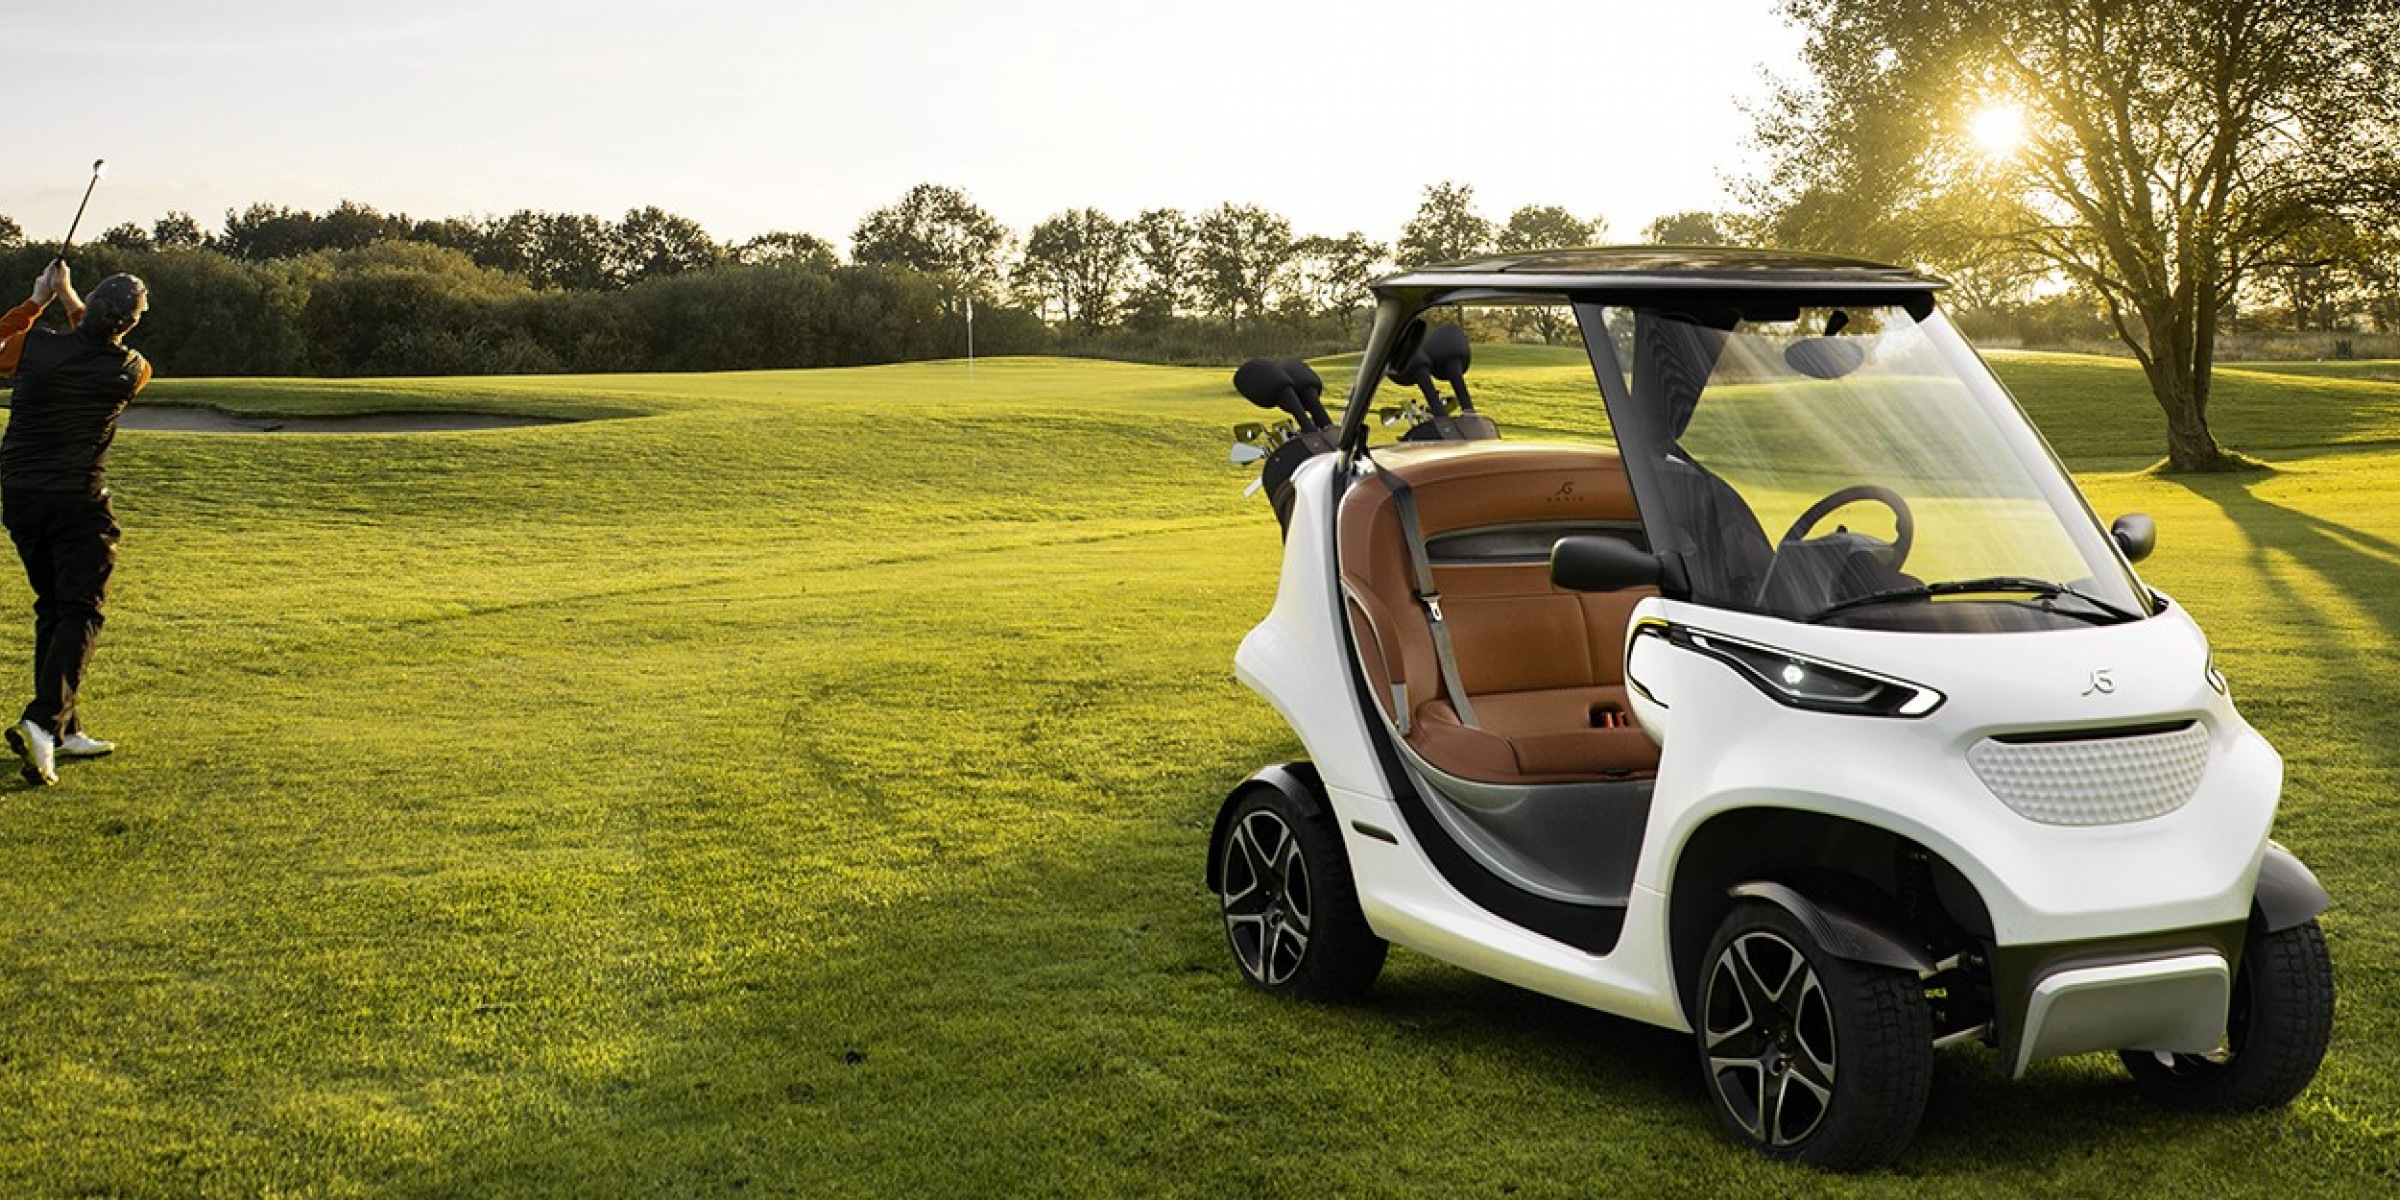 mansory_garia_golf_car_inspired_by_mercedes-benz_style_04.jpg